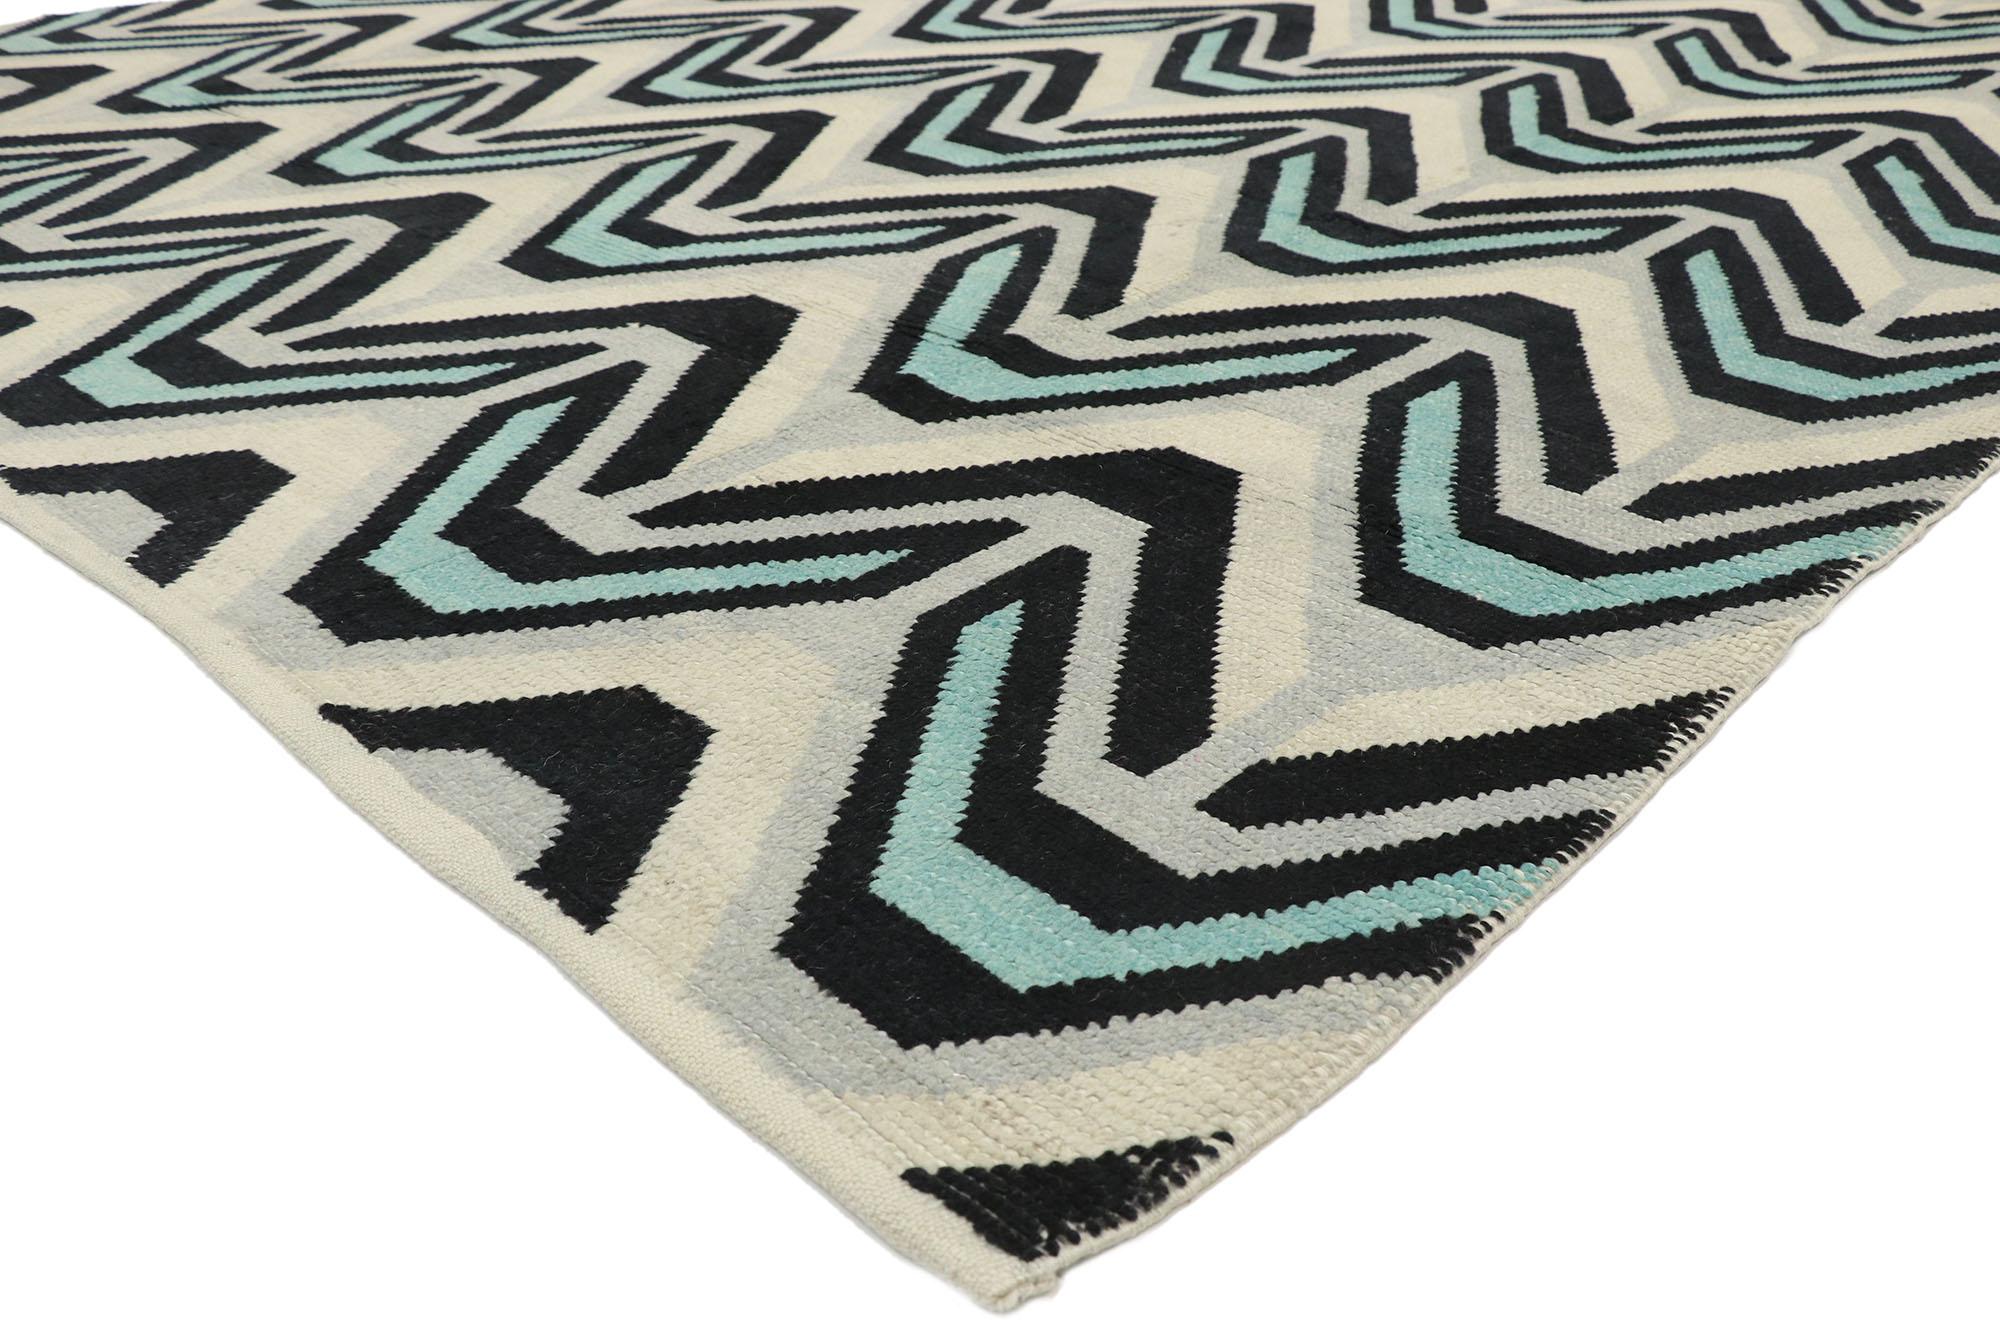 52994 new contemporary Moroccan Rug with Retro Postmodern style. Showcasing a bold expressive design, incredible detail and texture, this hand-knotted wool contemporary Moroccan style rug is a captivating vision of woven beauty. It features an